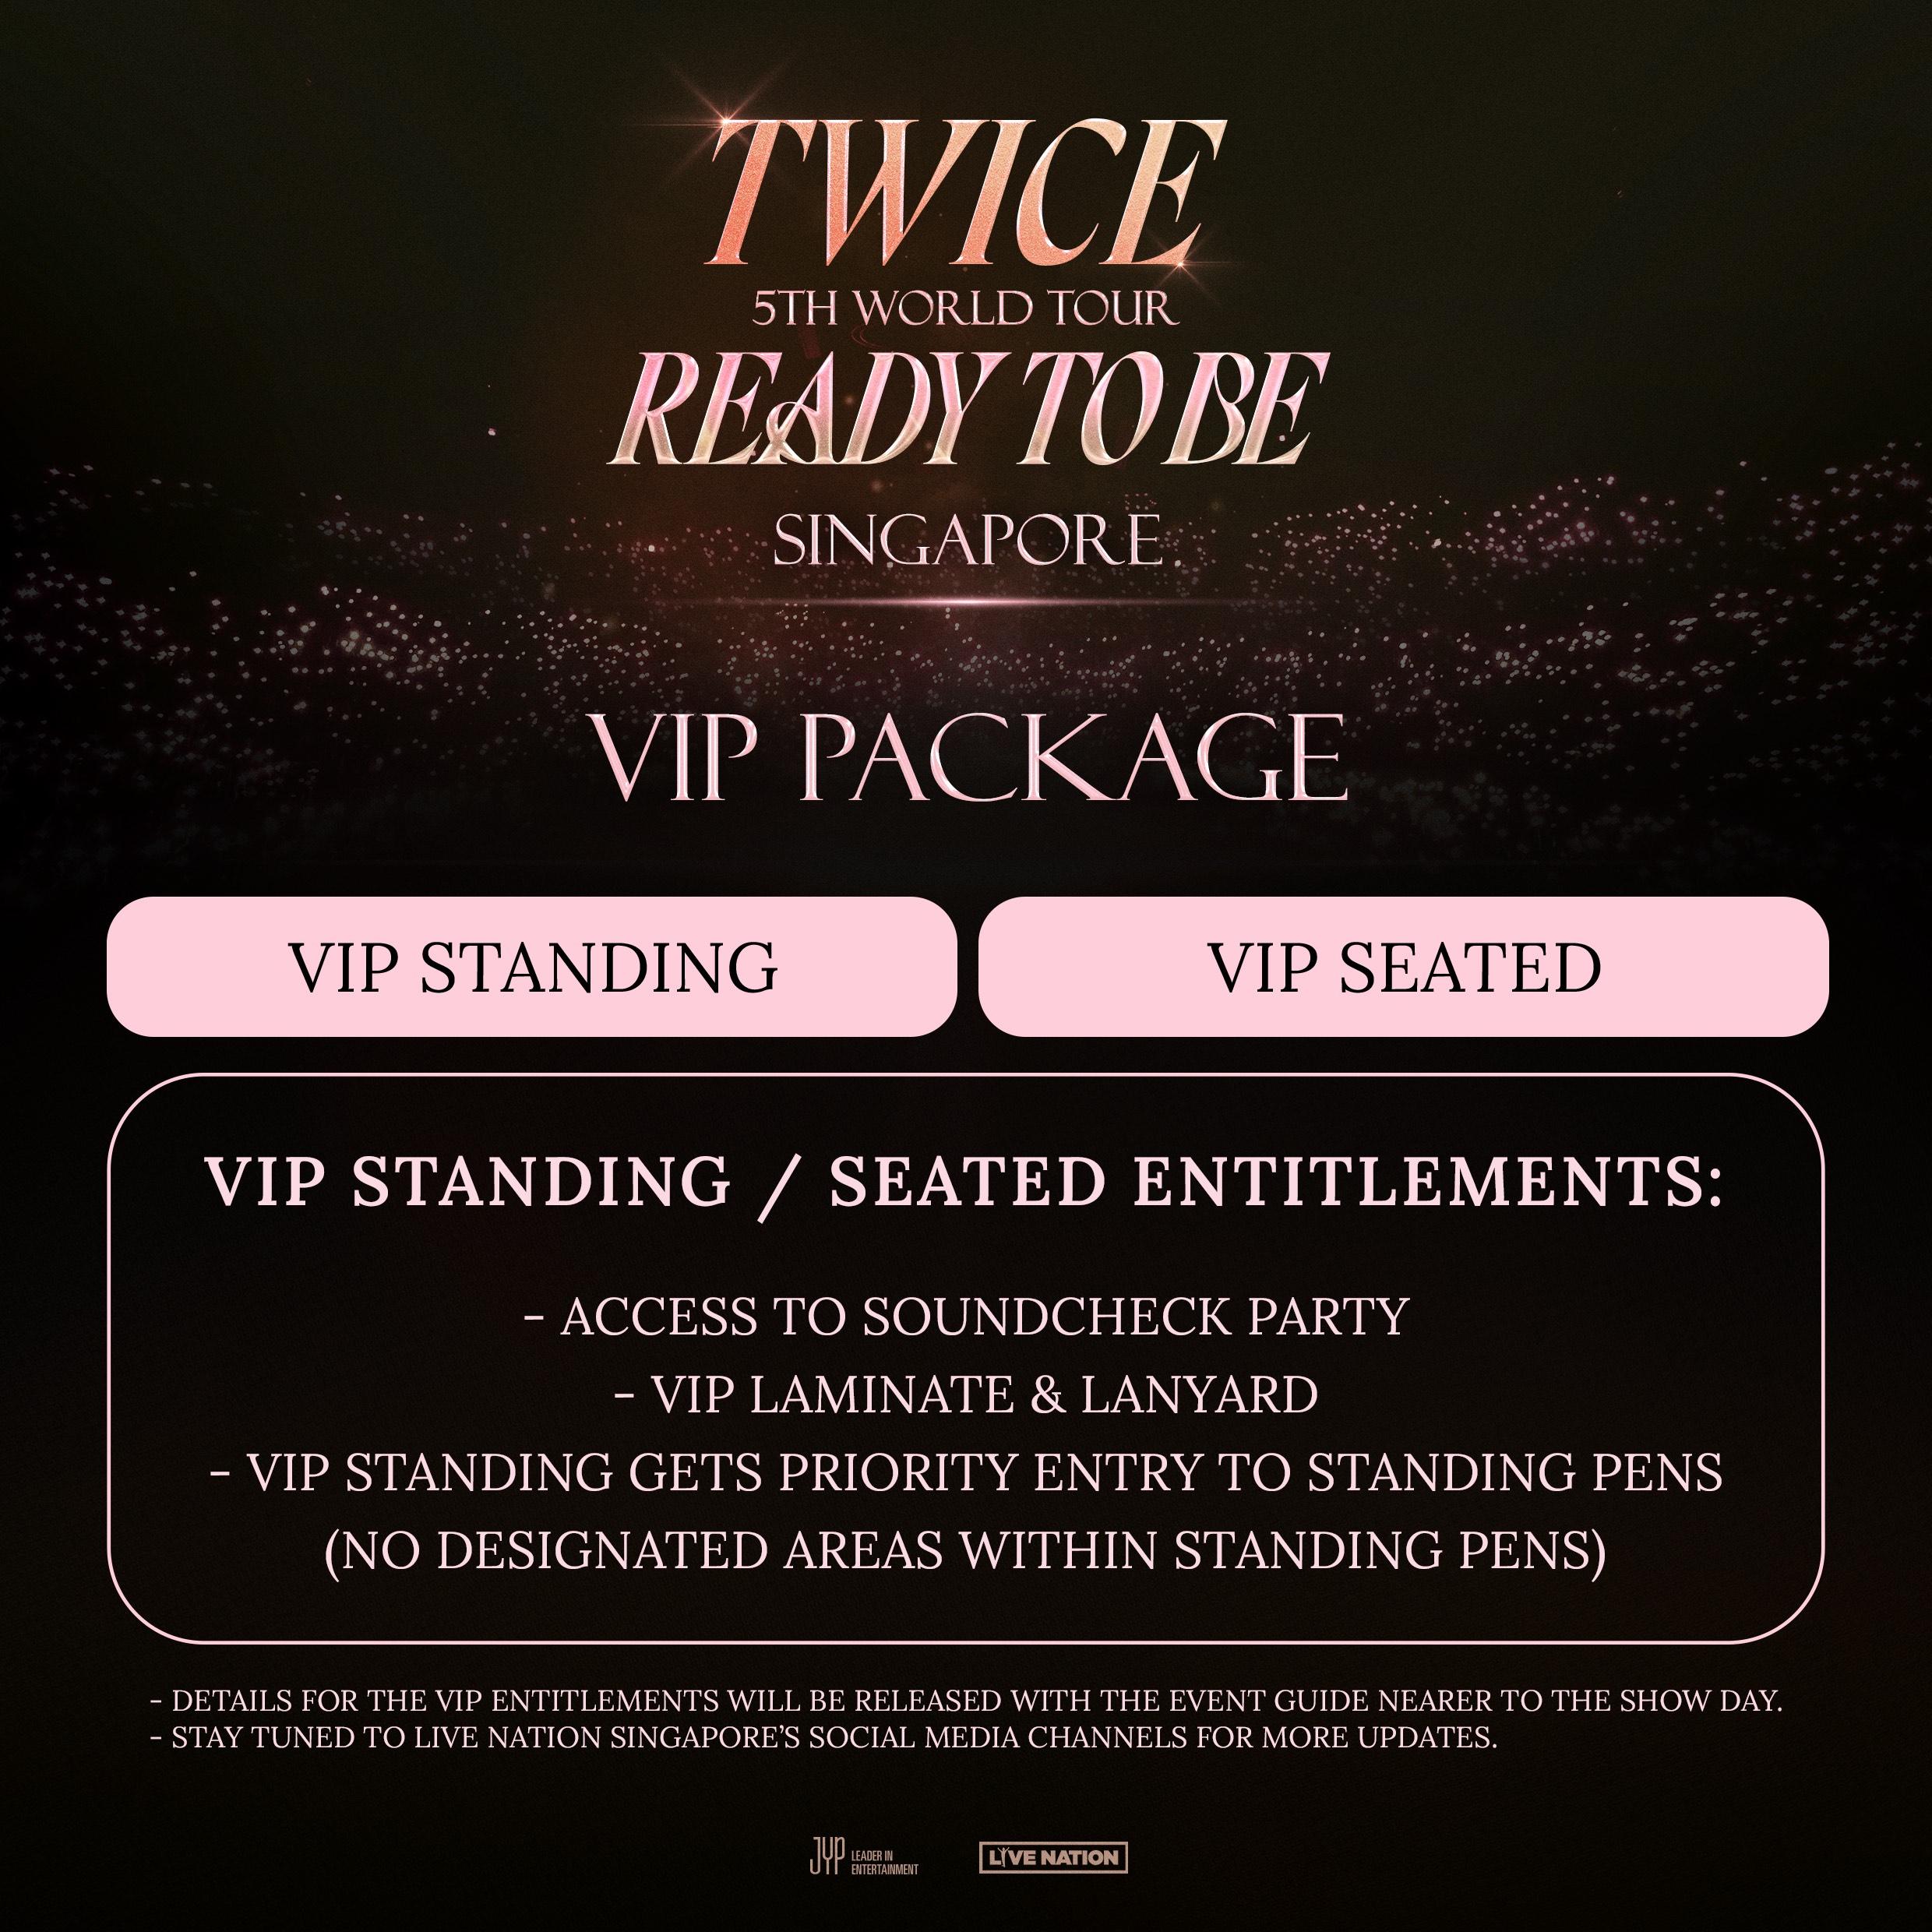 Kpop group TWICE S'pore concert tickets on sale from Jun. 8